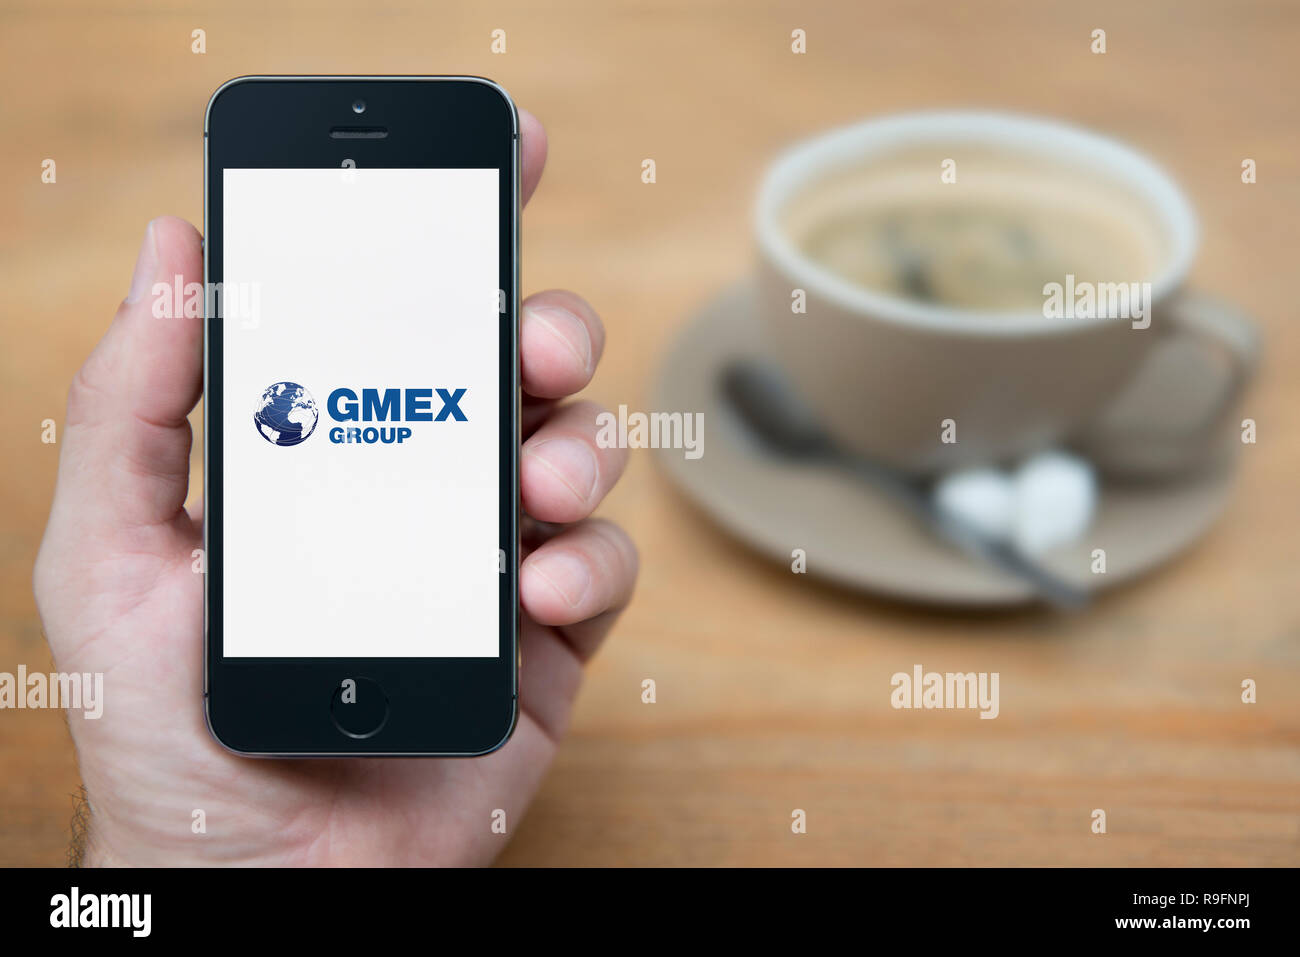 A man looks at his iPhone which displays the Gmex Group logo (Editorial use only). Stock Photo